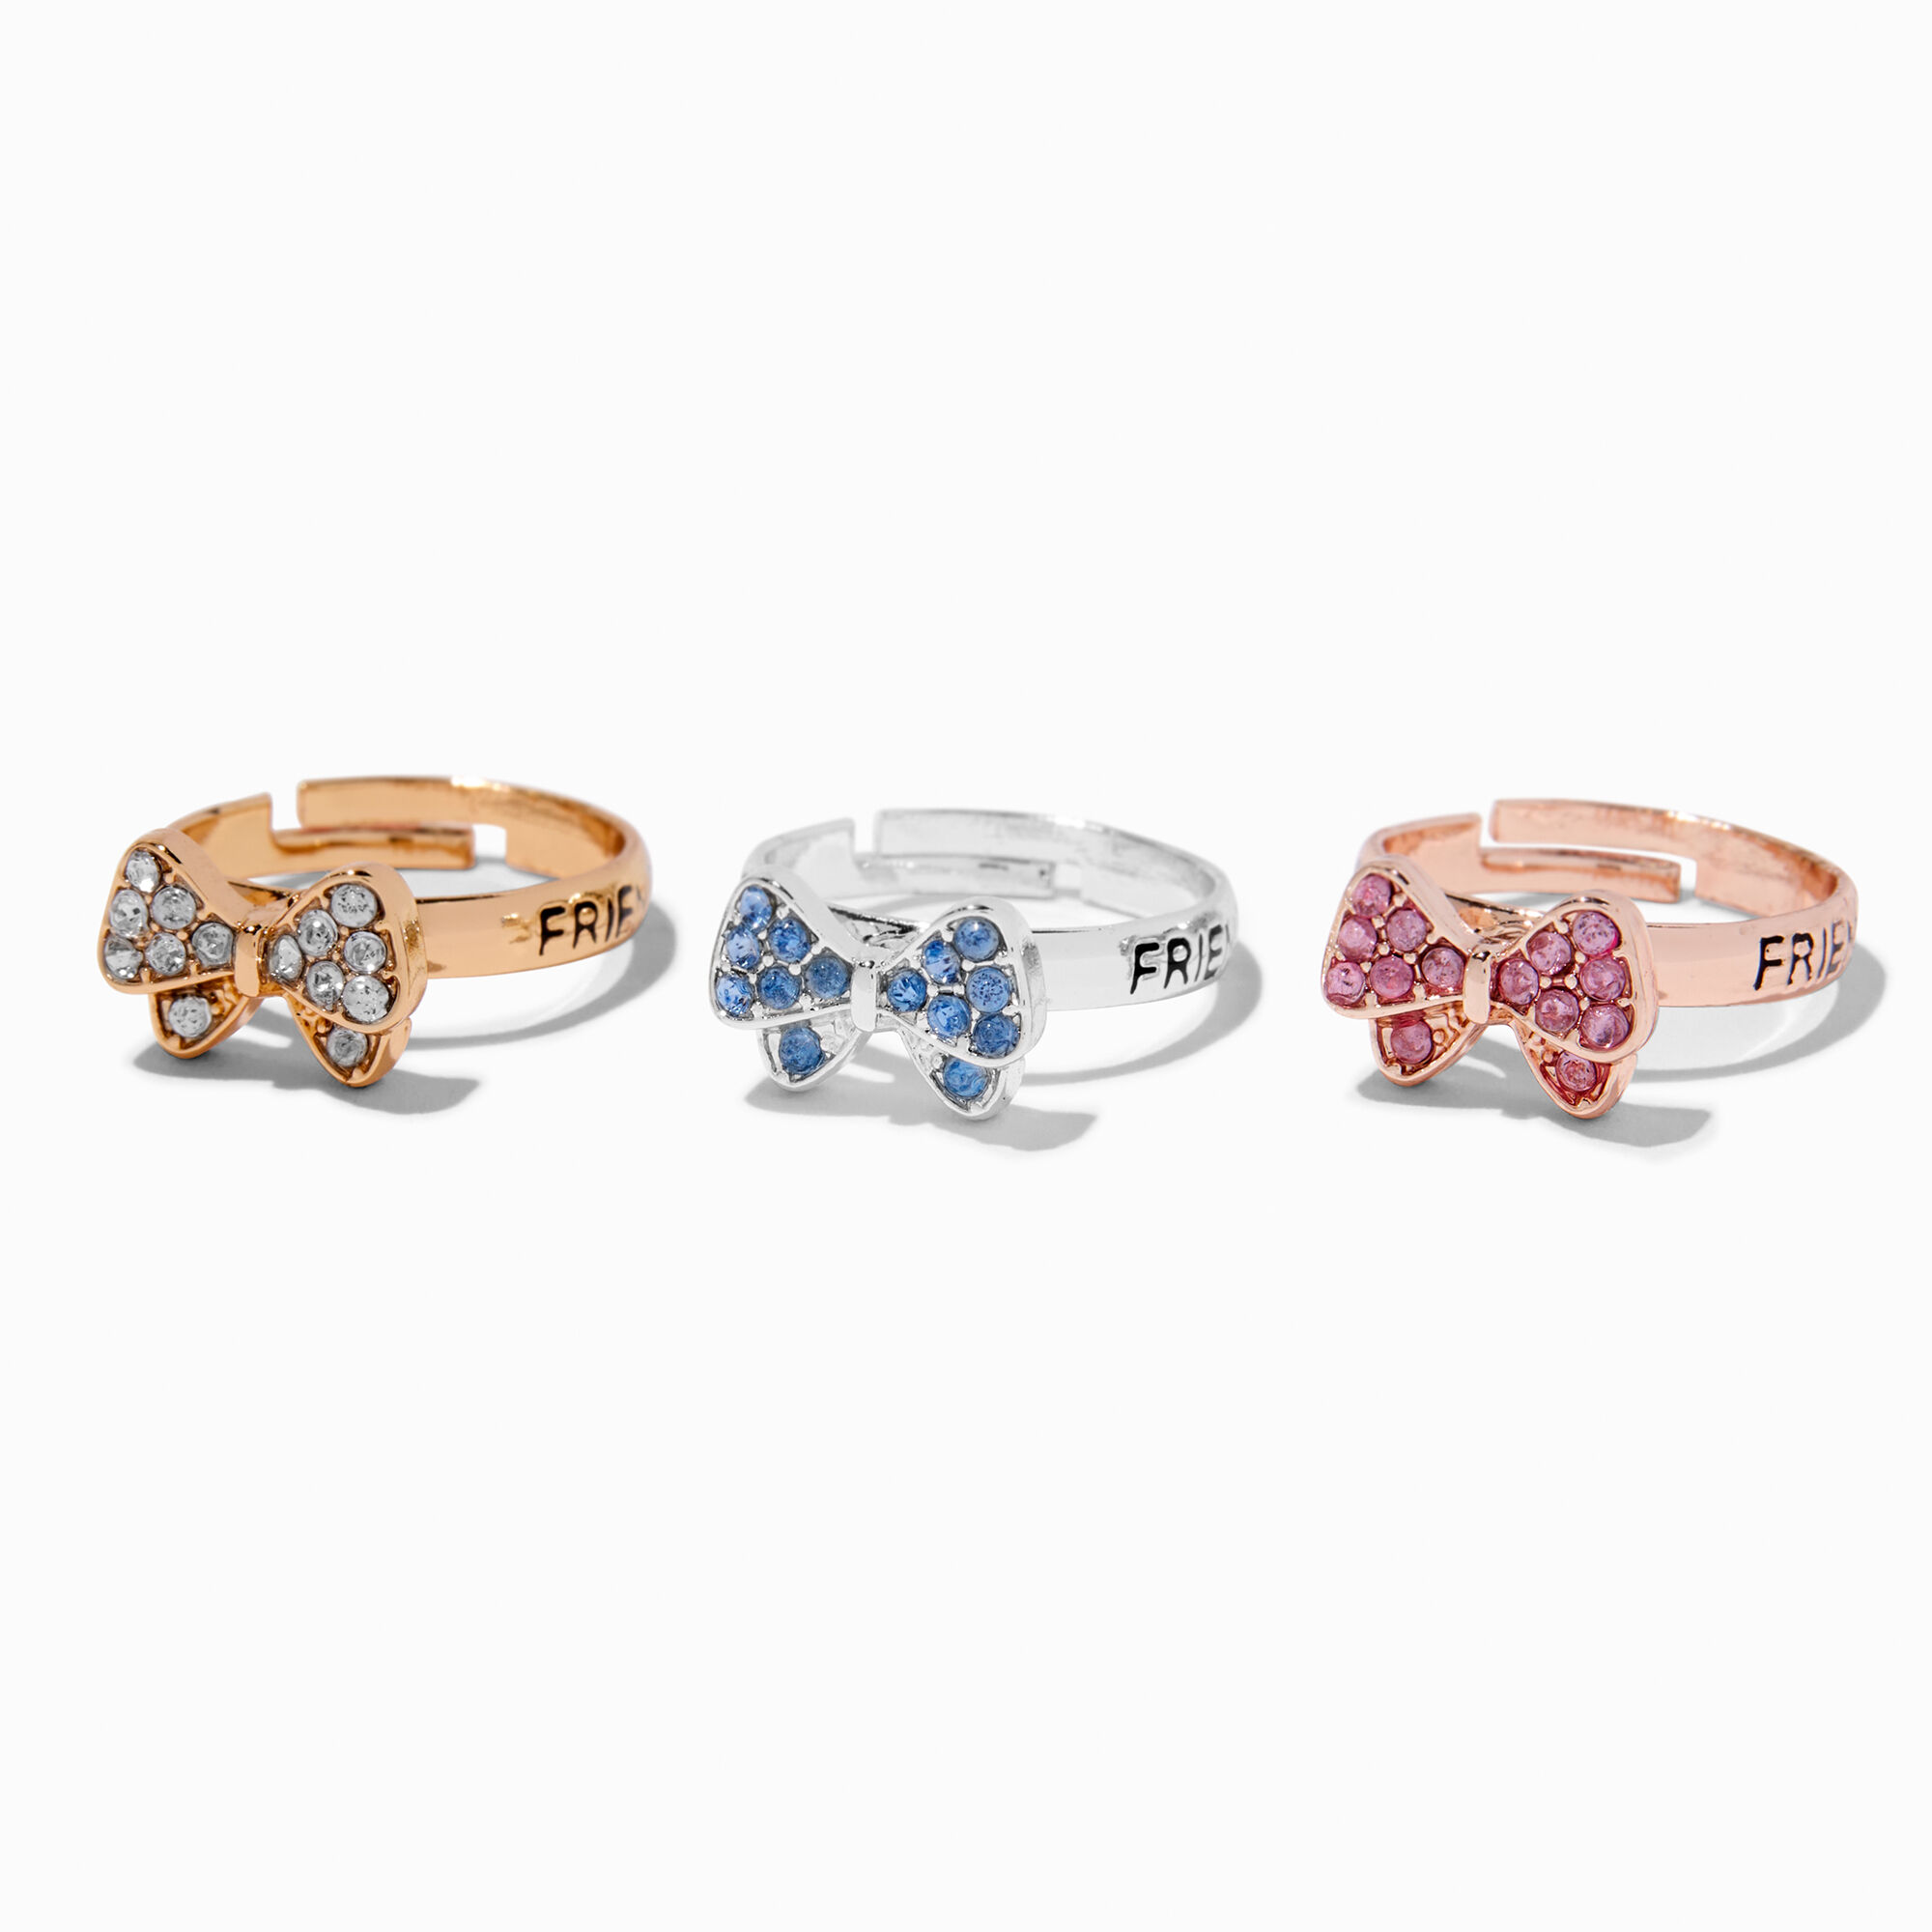 View Claires Mixed Metal Best Friends Embellished Bows Rings 3 Pack Rose Gold information